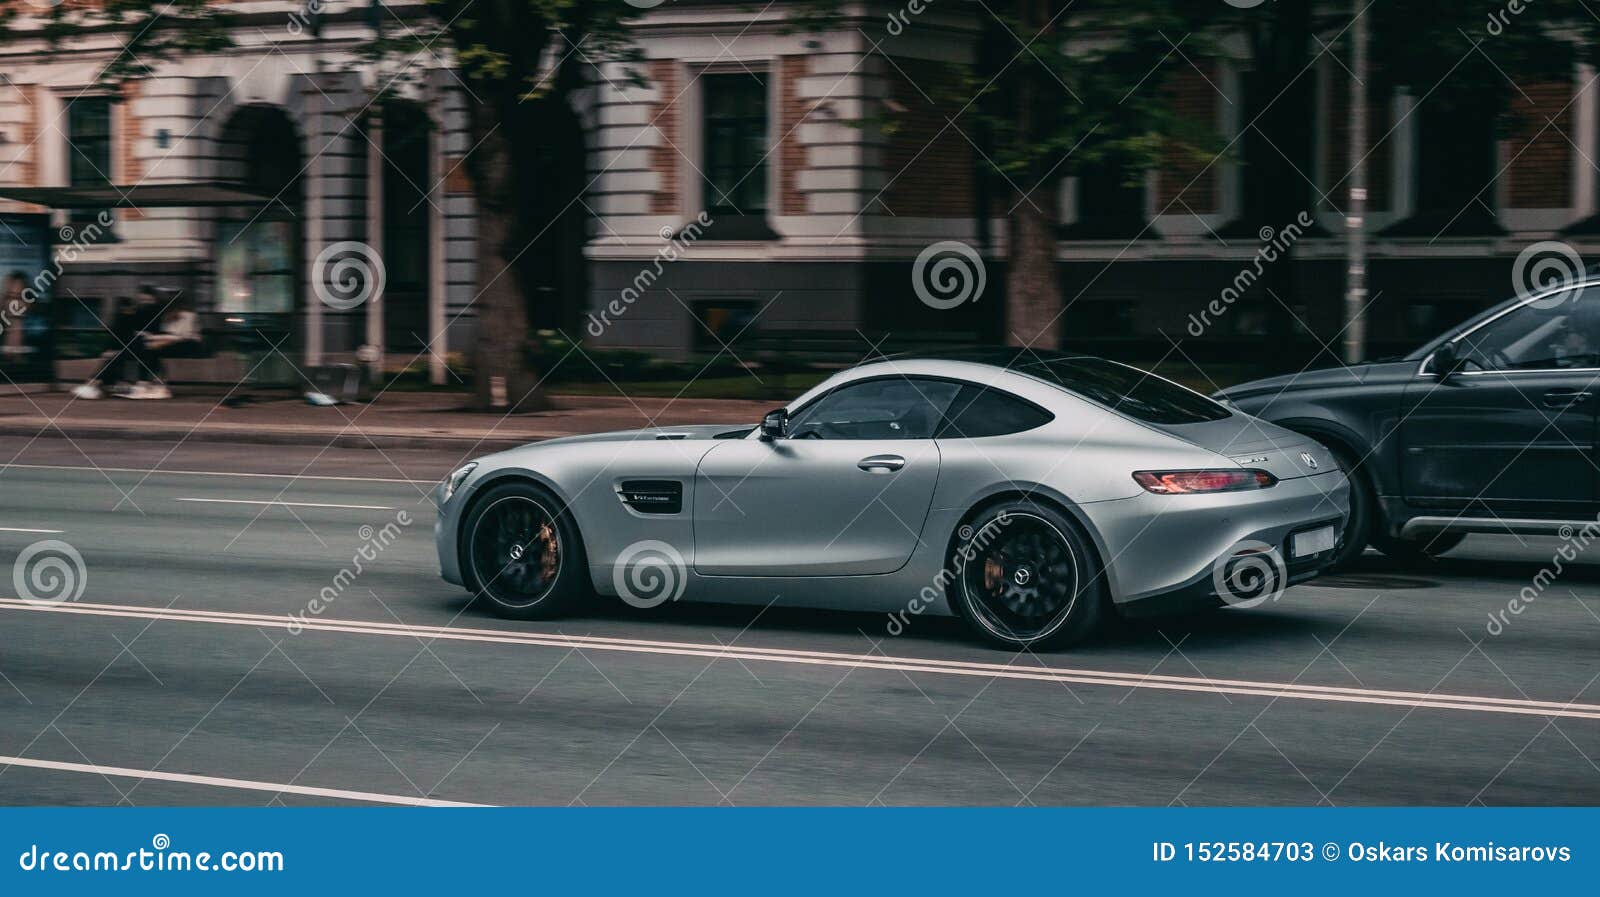 183 Gts Amg Photos Free Royalty Free Stock Photos From Dreamstime